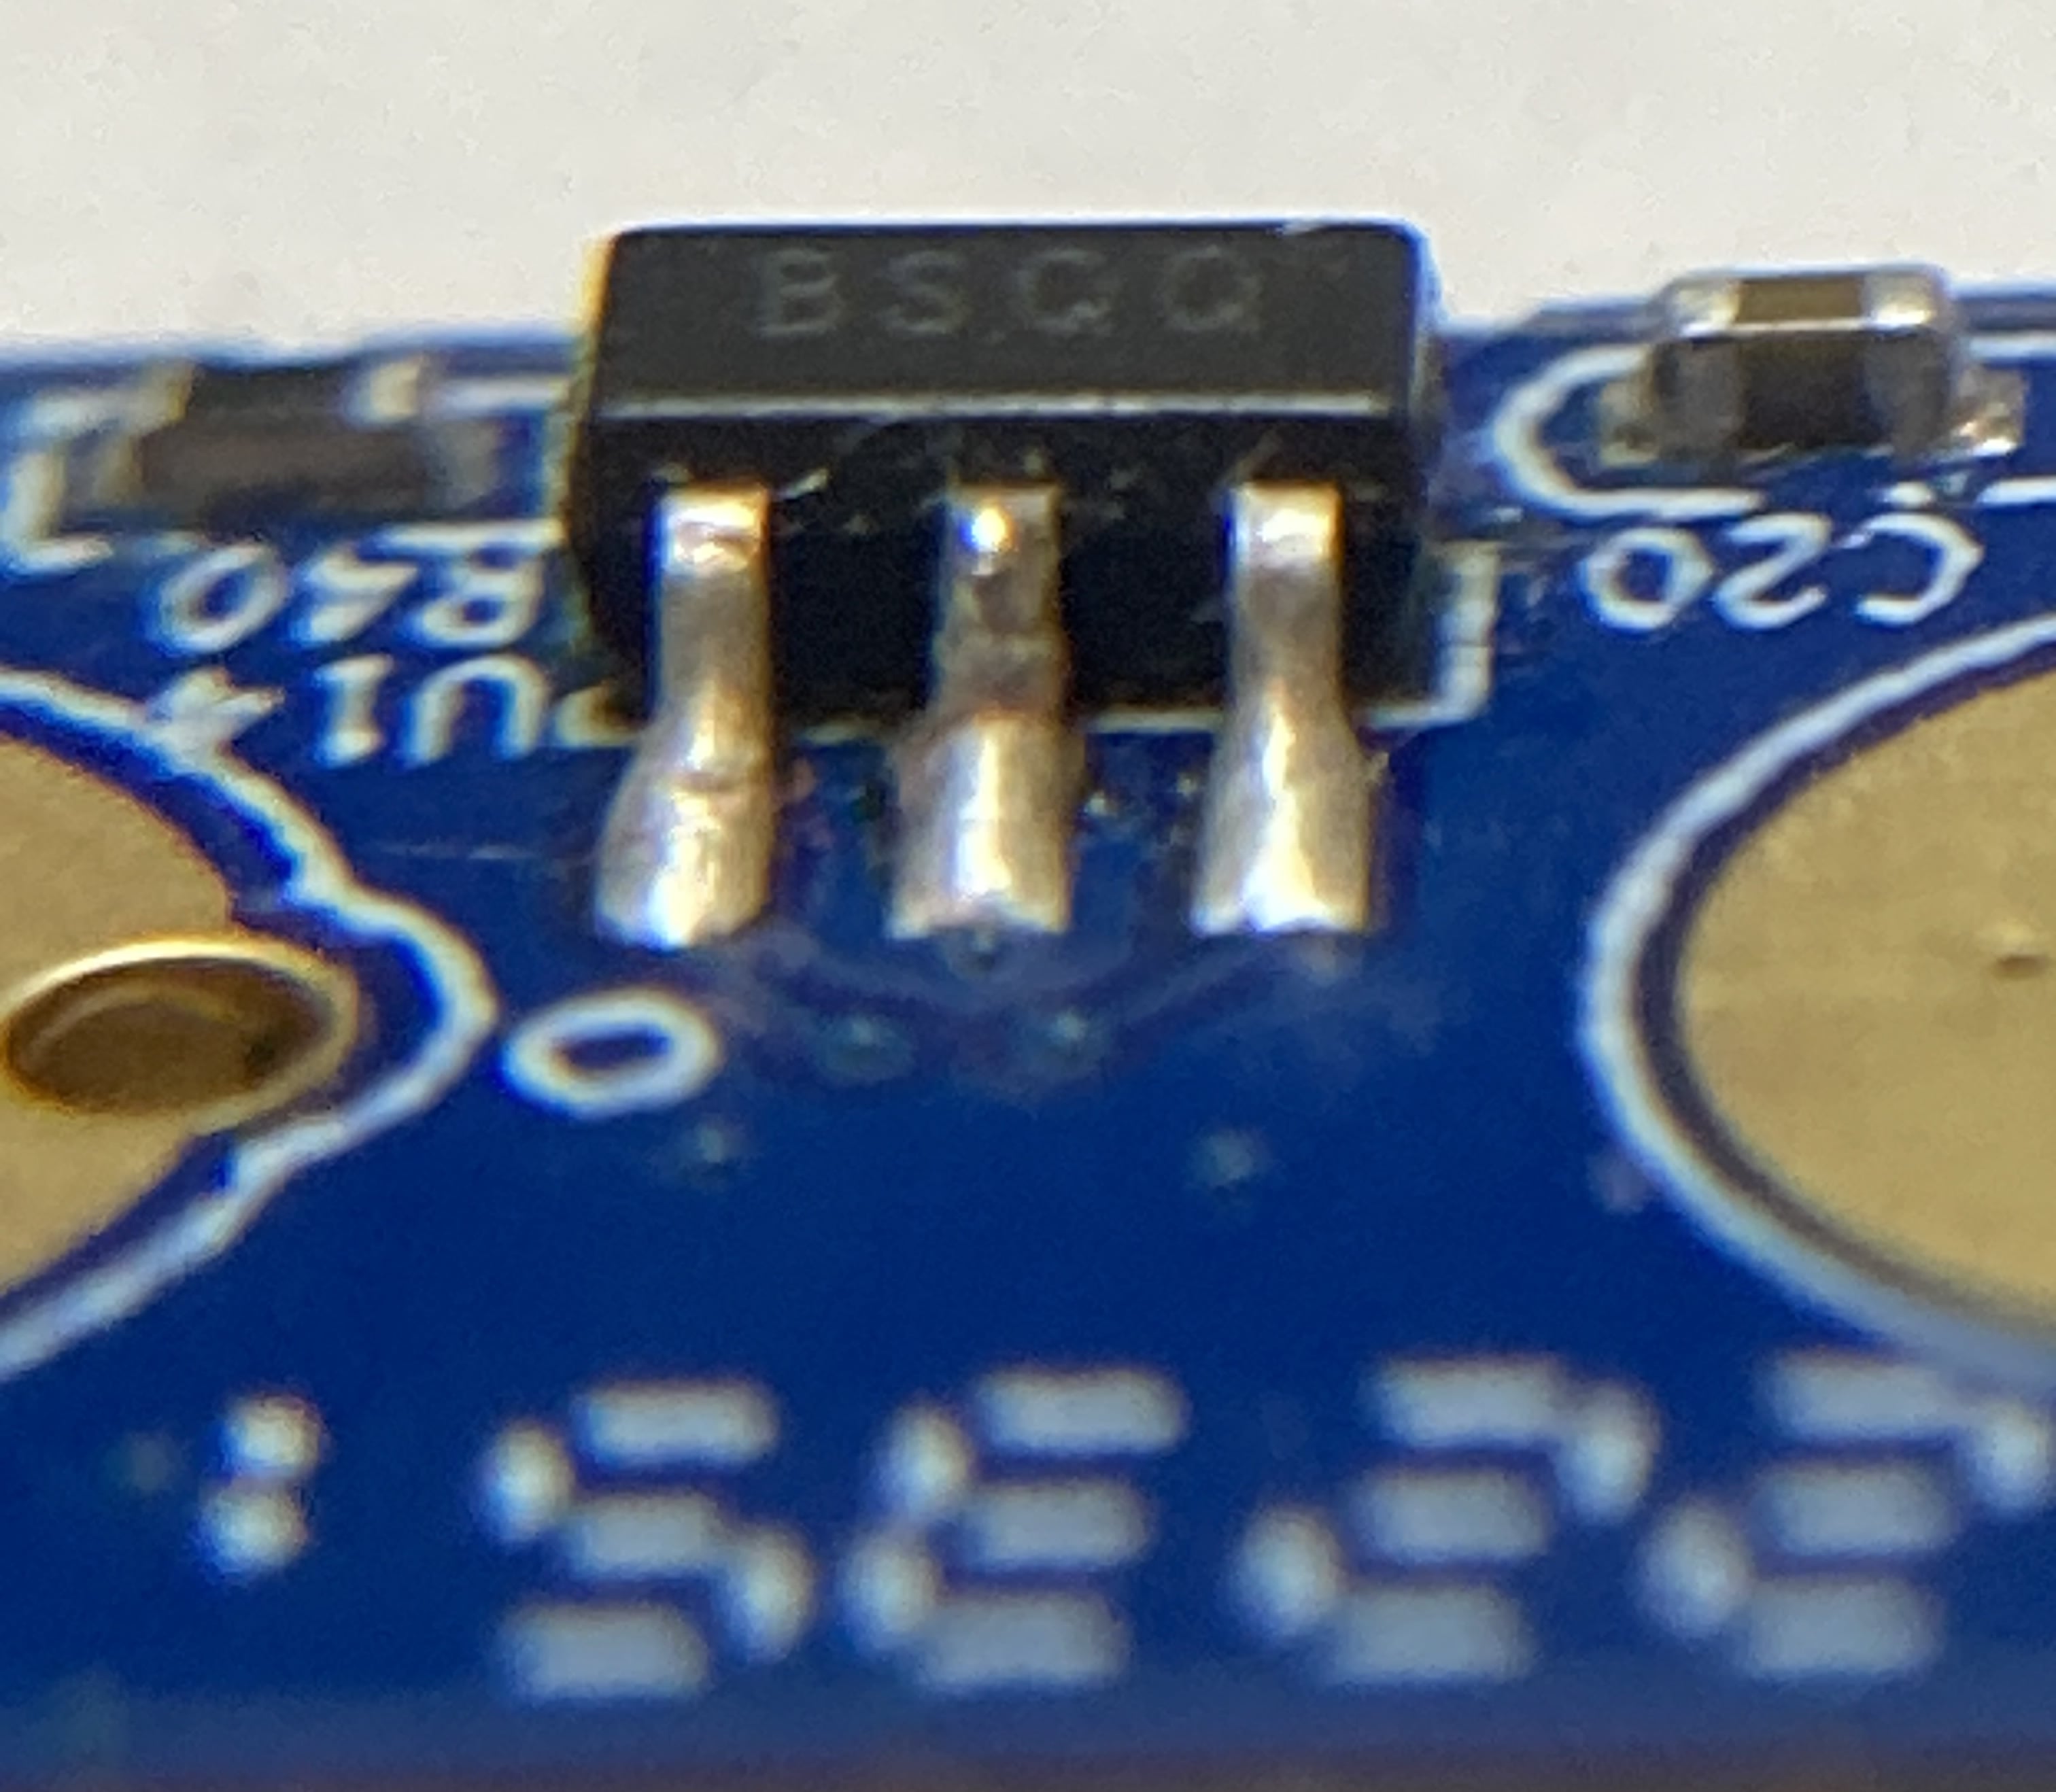 Only needs small amount of solder